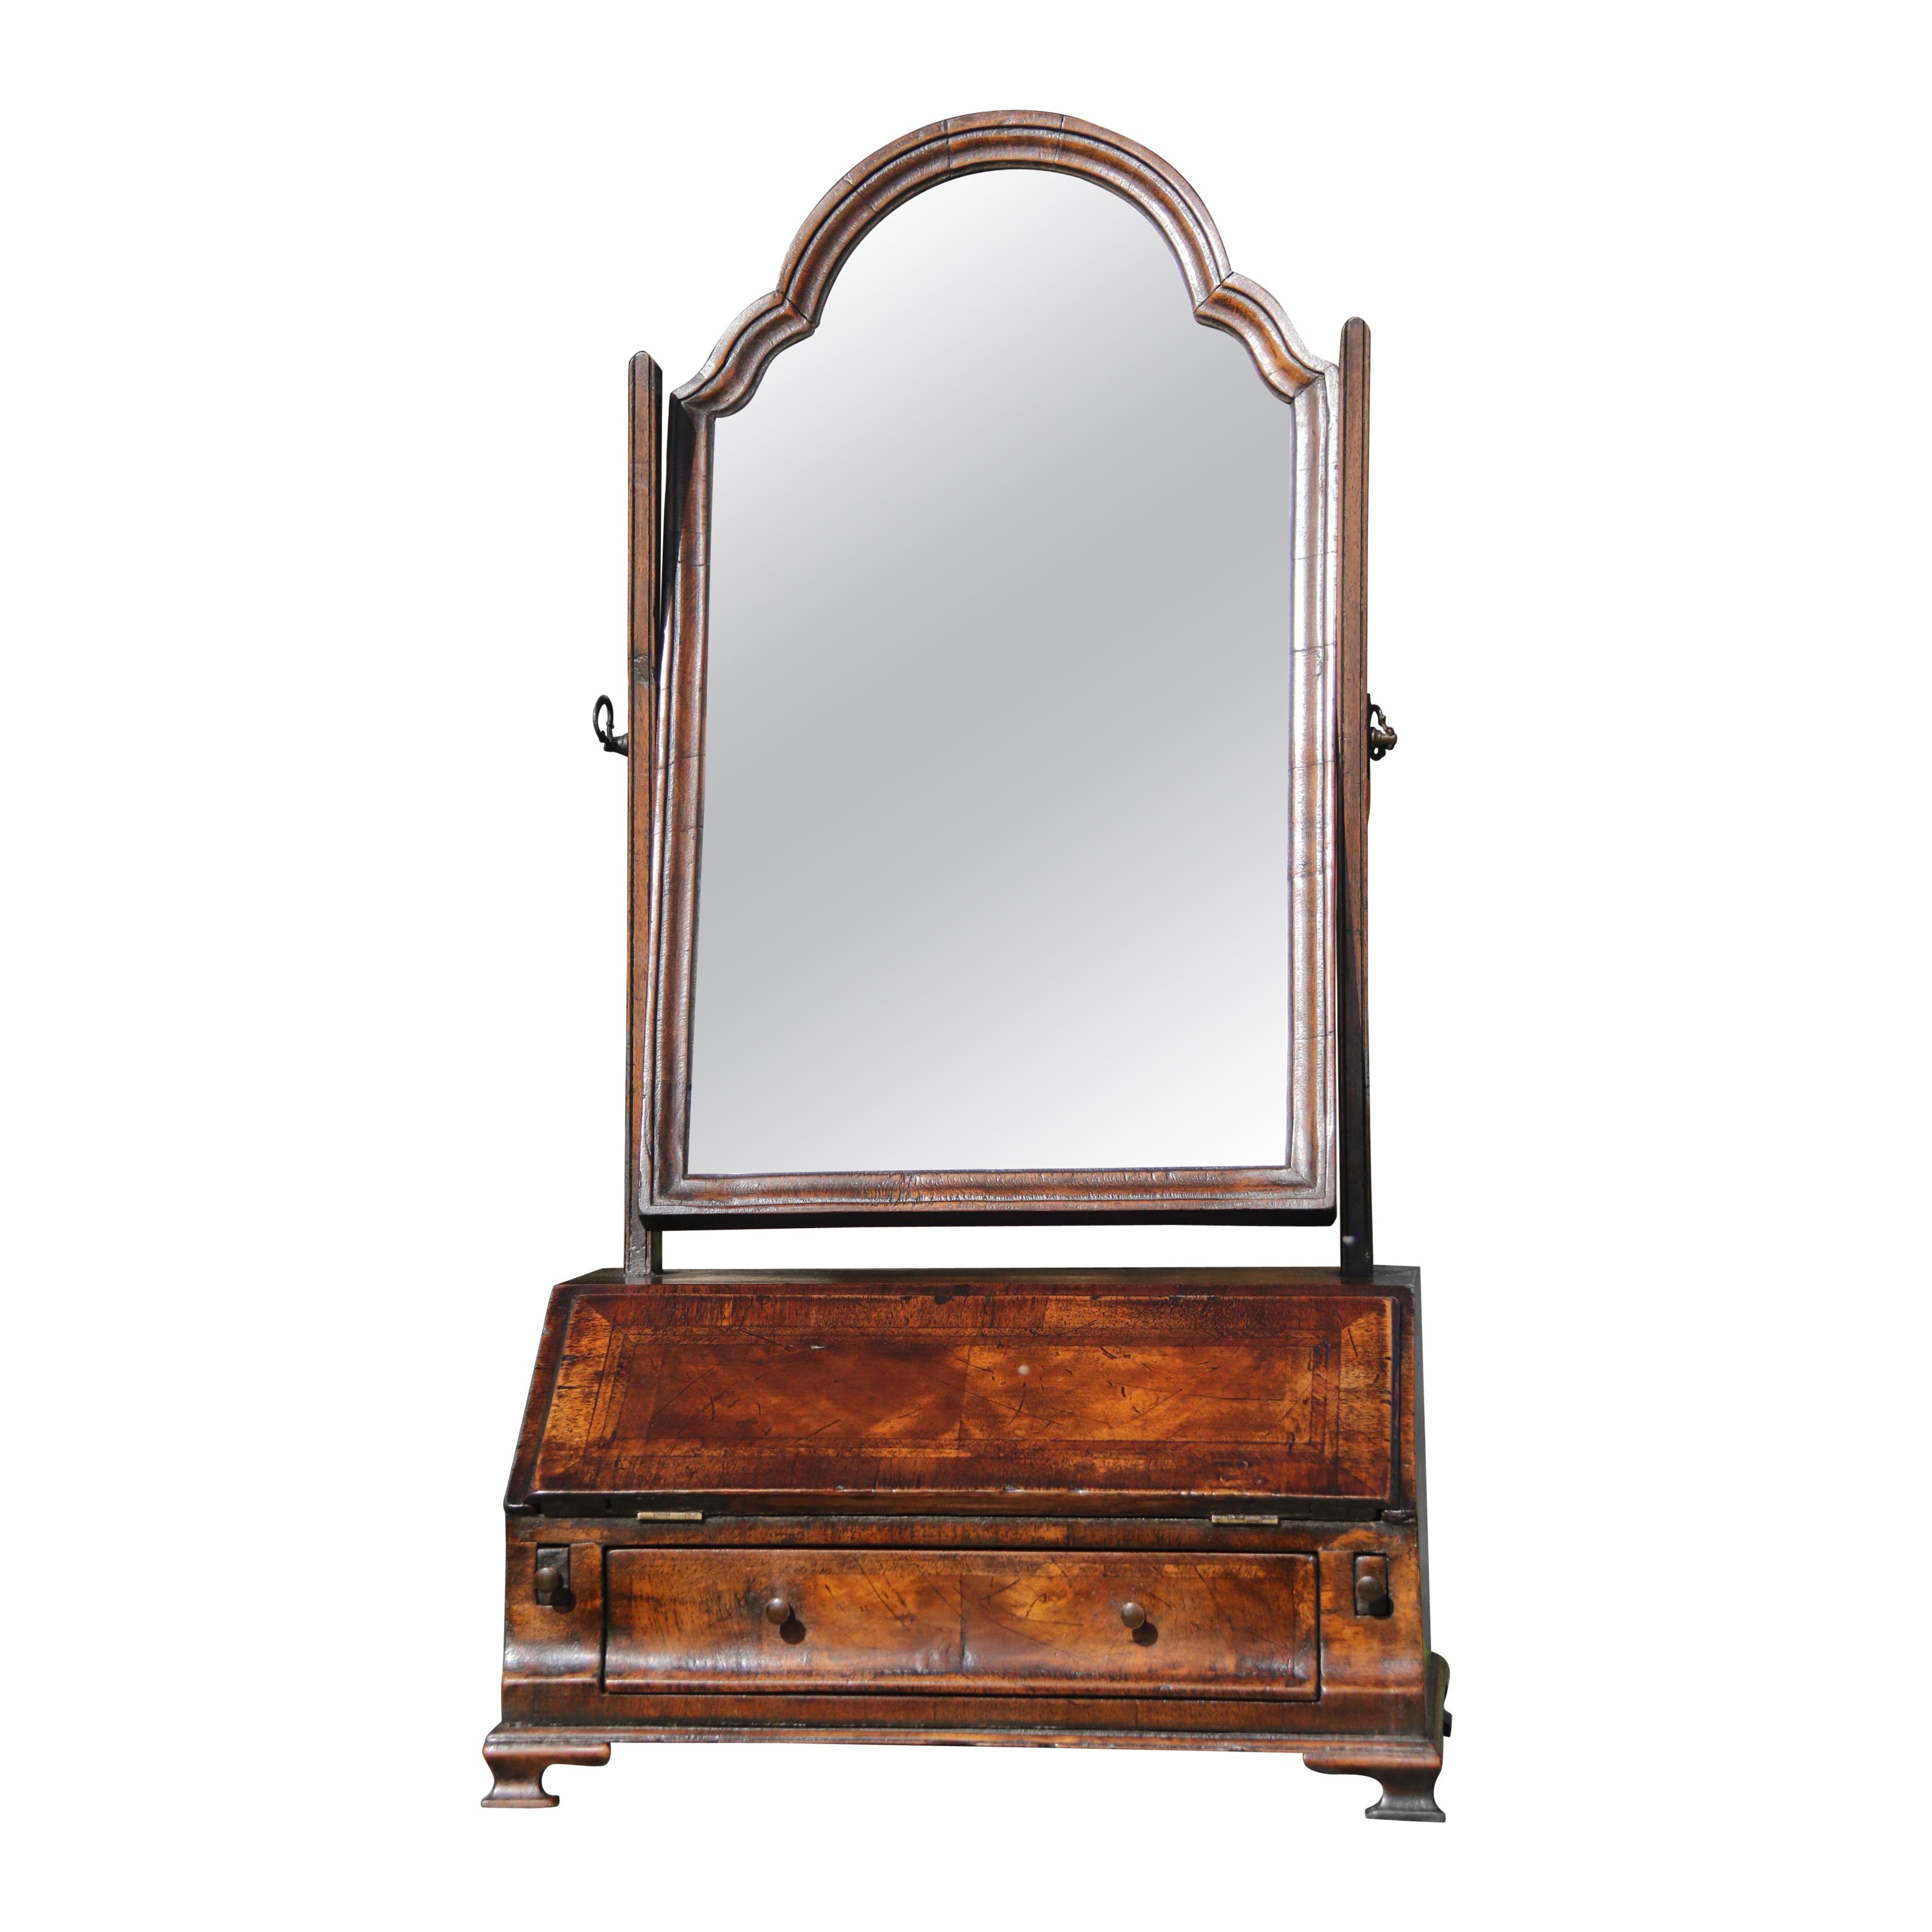 Antique rare early 18th century style figured walnut table mirror English C 1860 For Sale